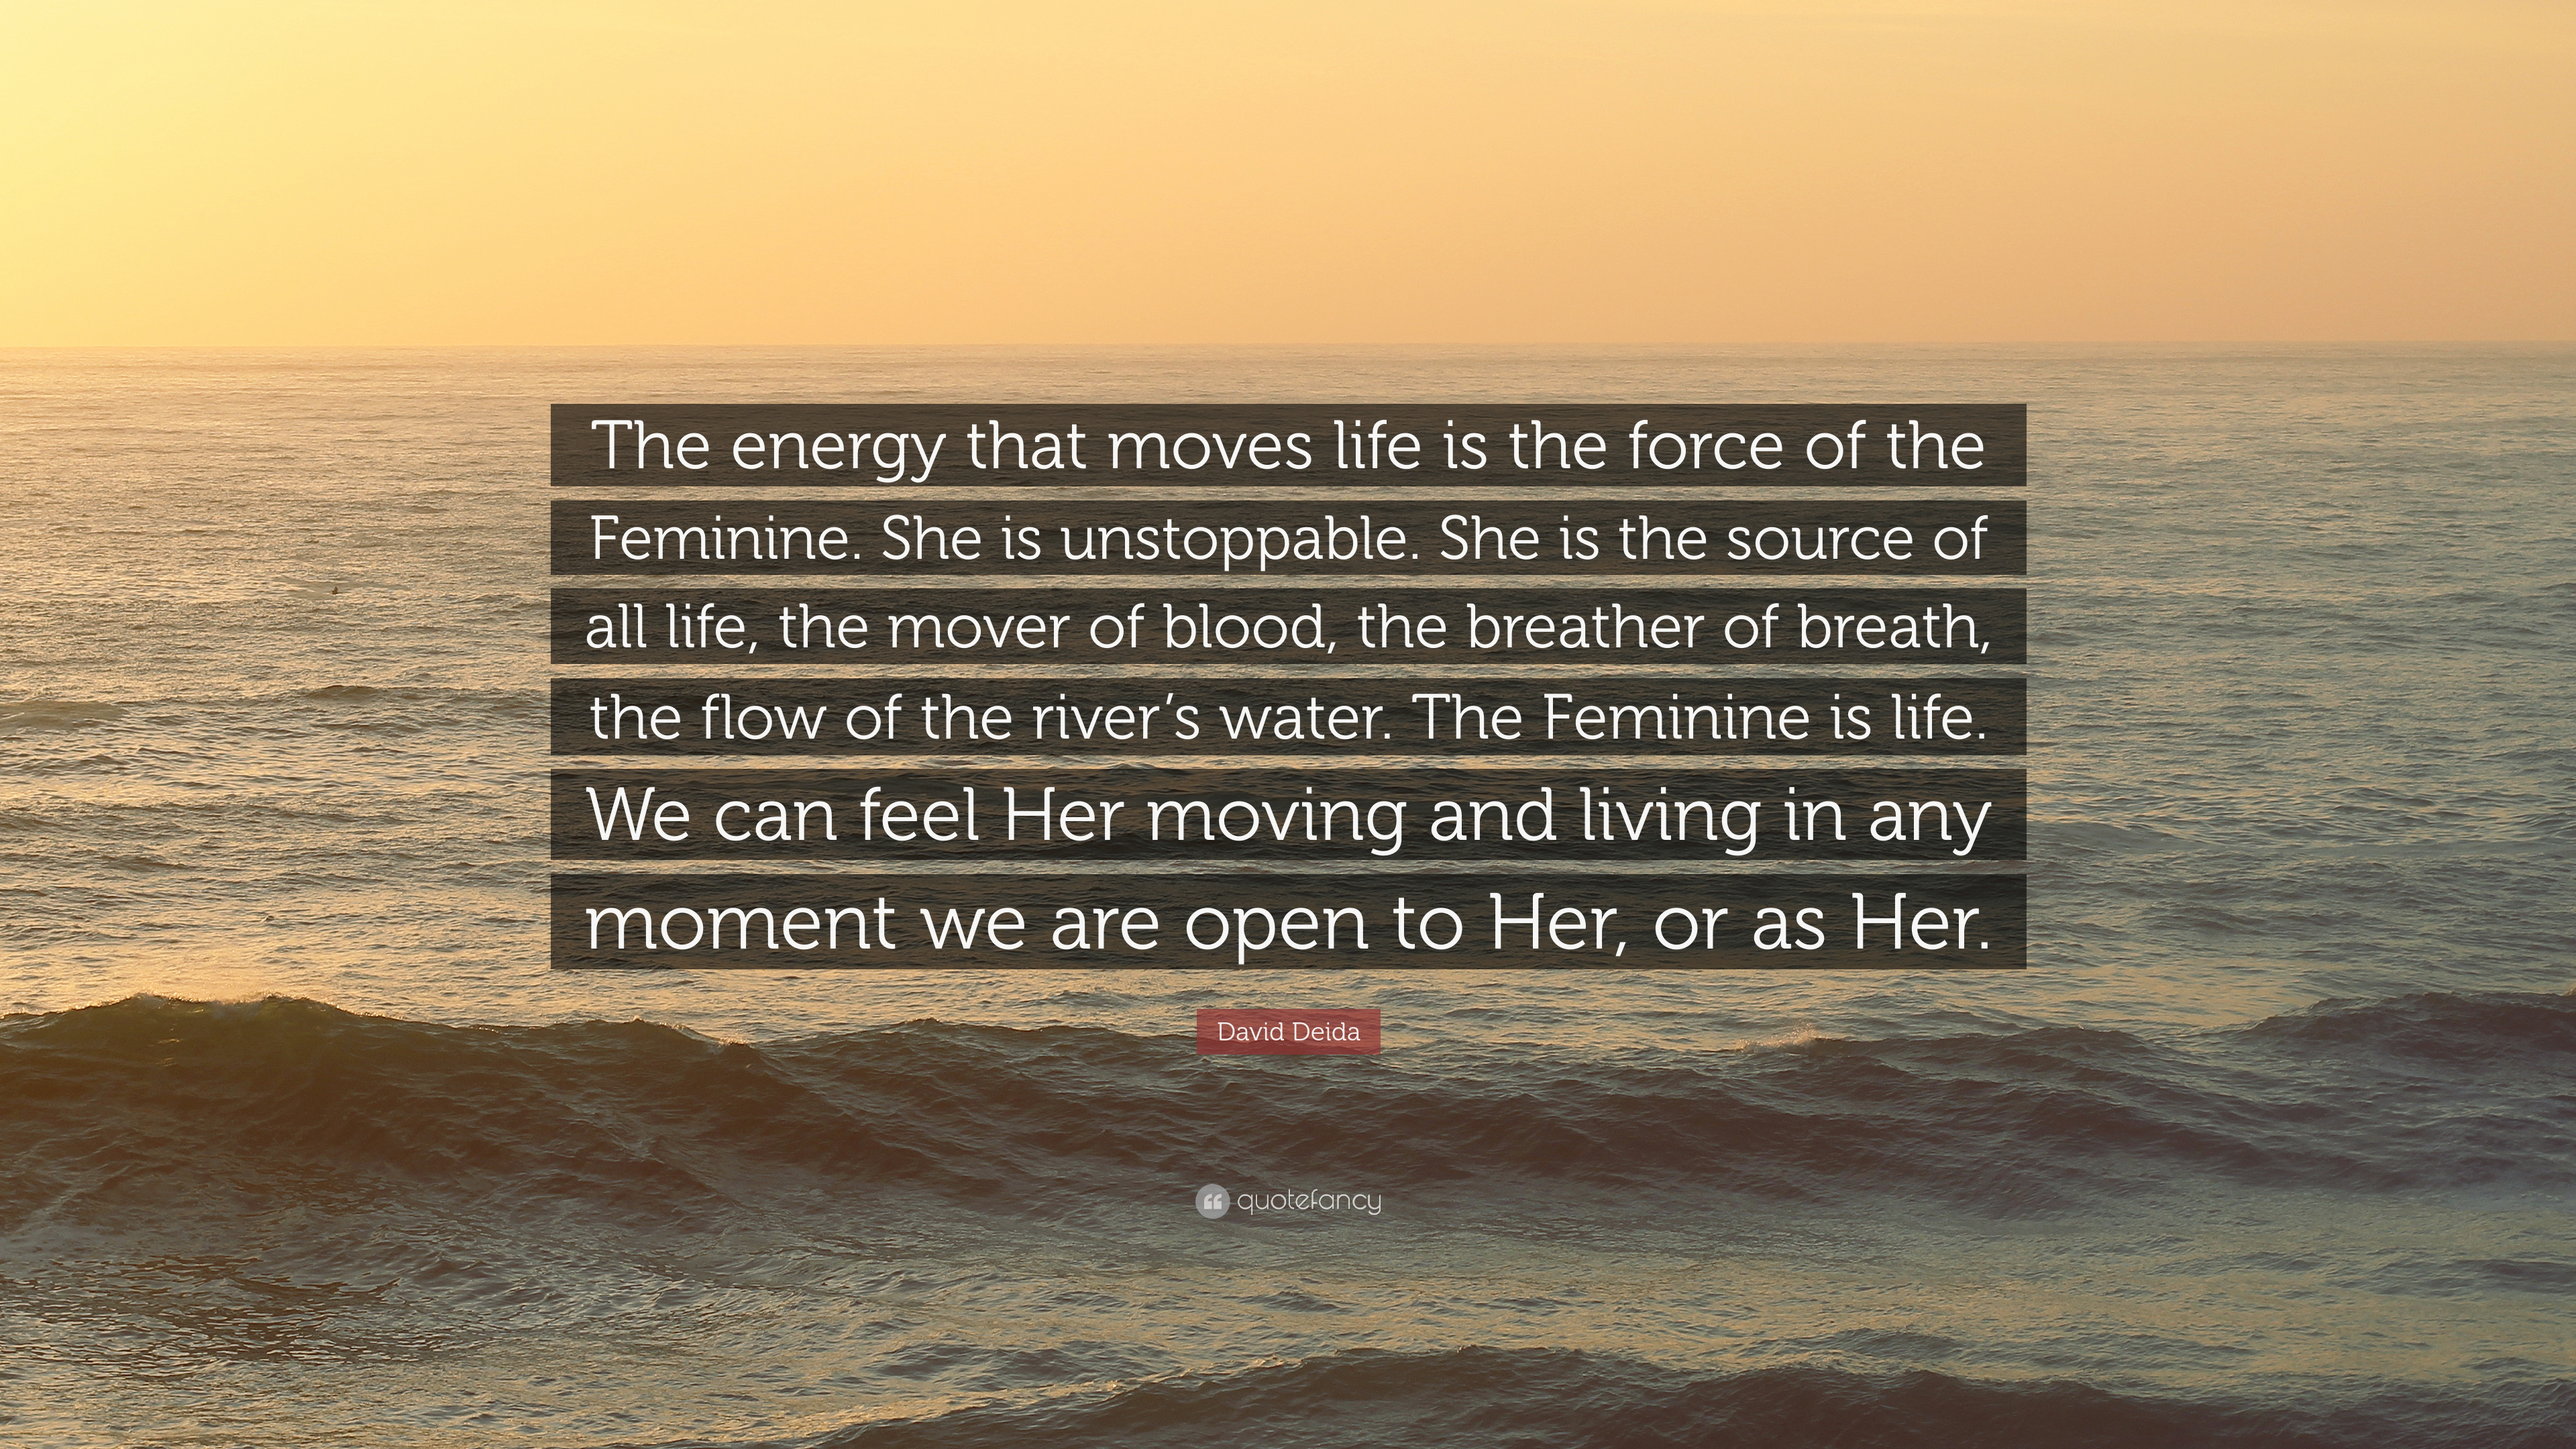 David Deida Quote: “The energy that moves life is the force of the ...